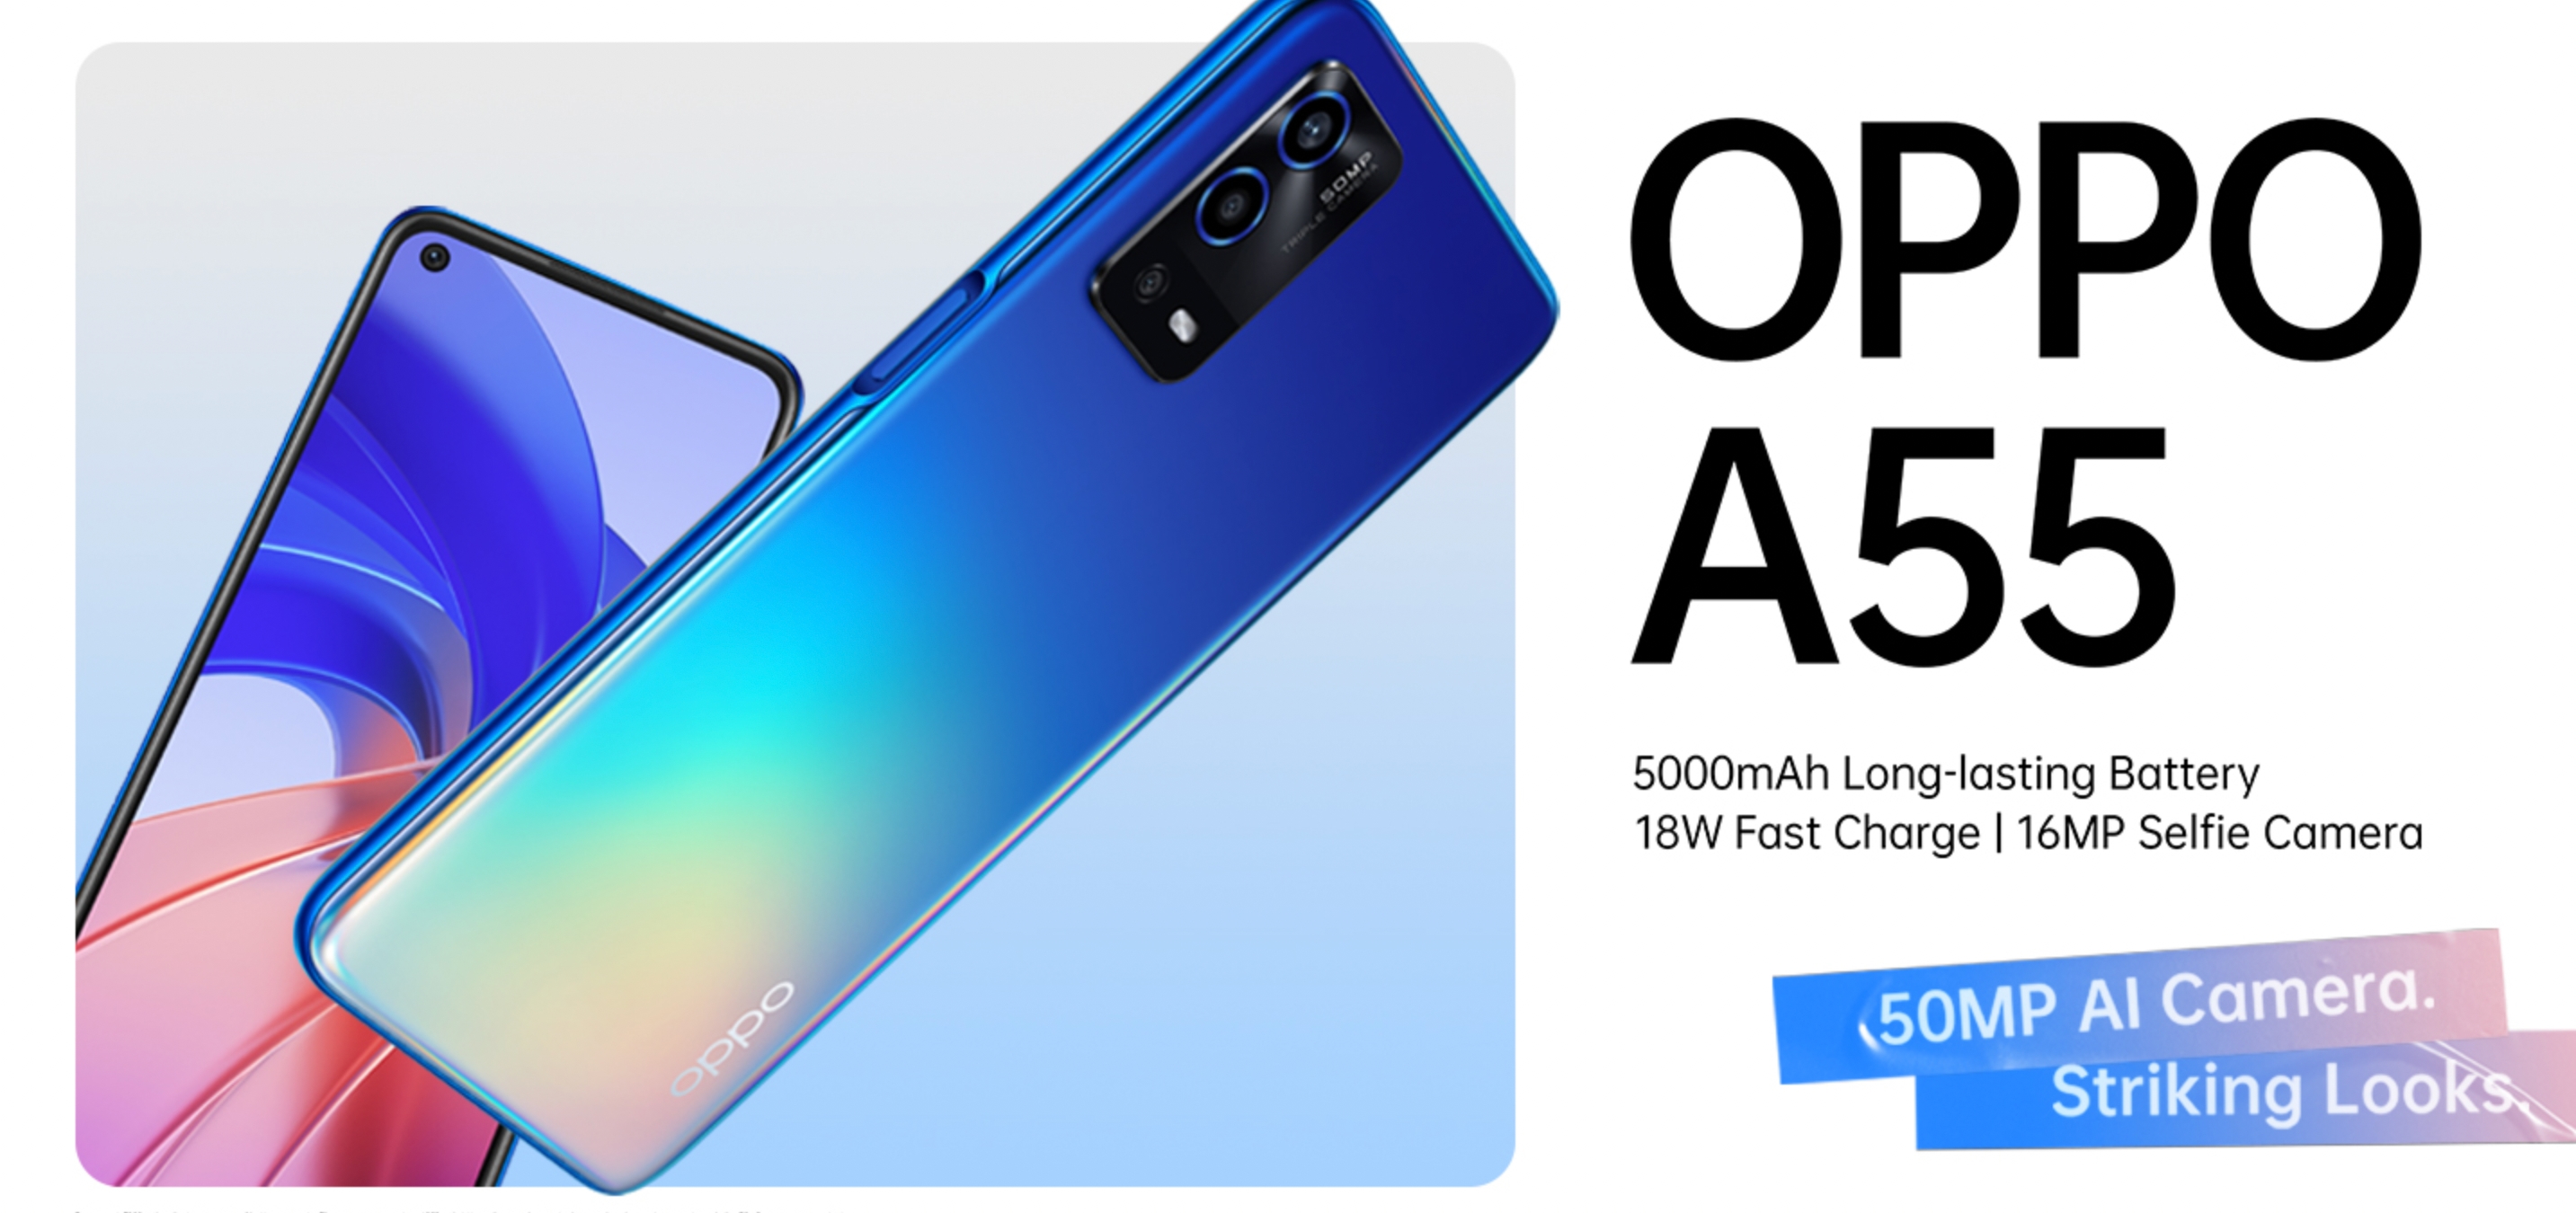 OPPO A55 4G: smartphone with MediaTek Helio G35 chip, IPX4, triple camera with 50 MP for $210